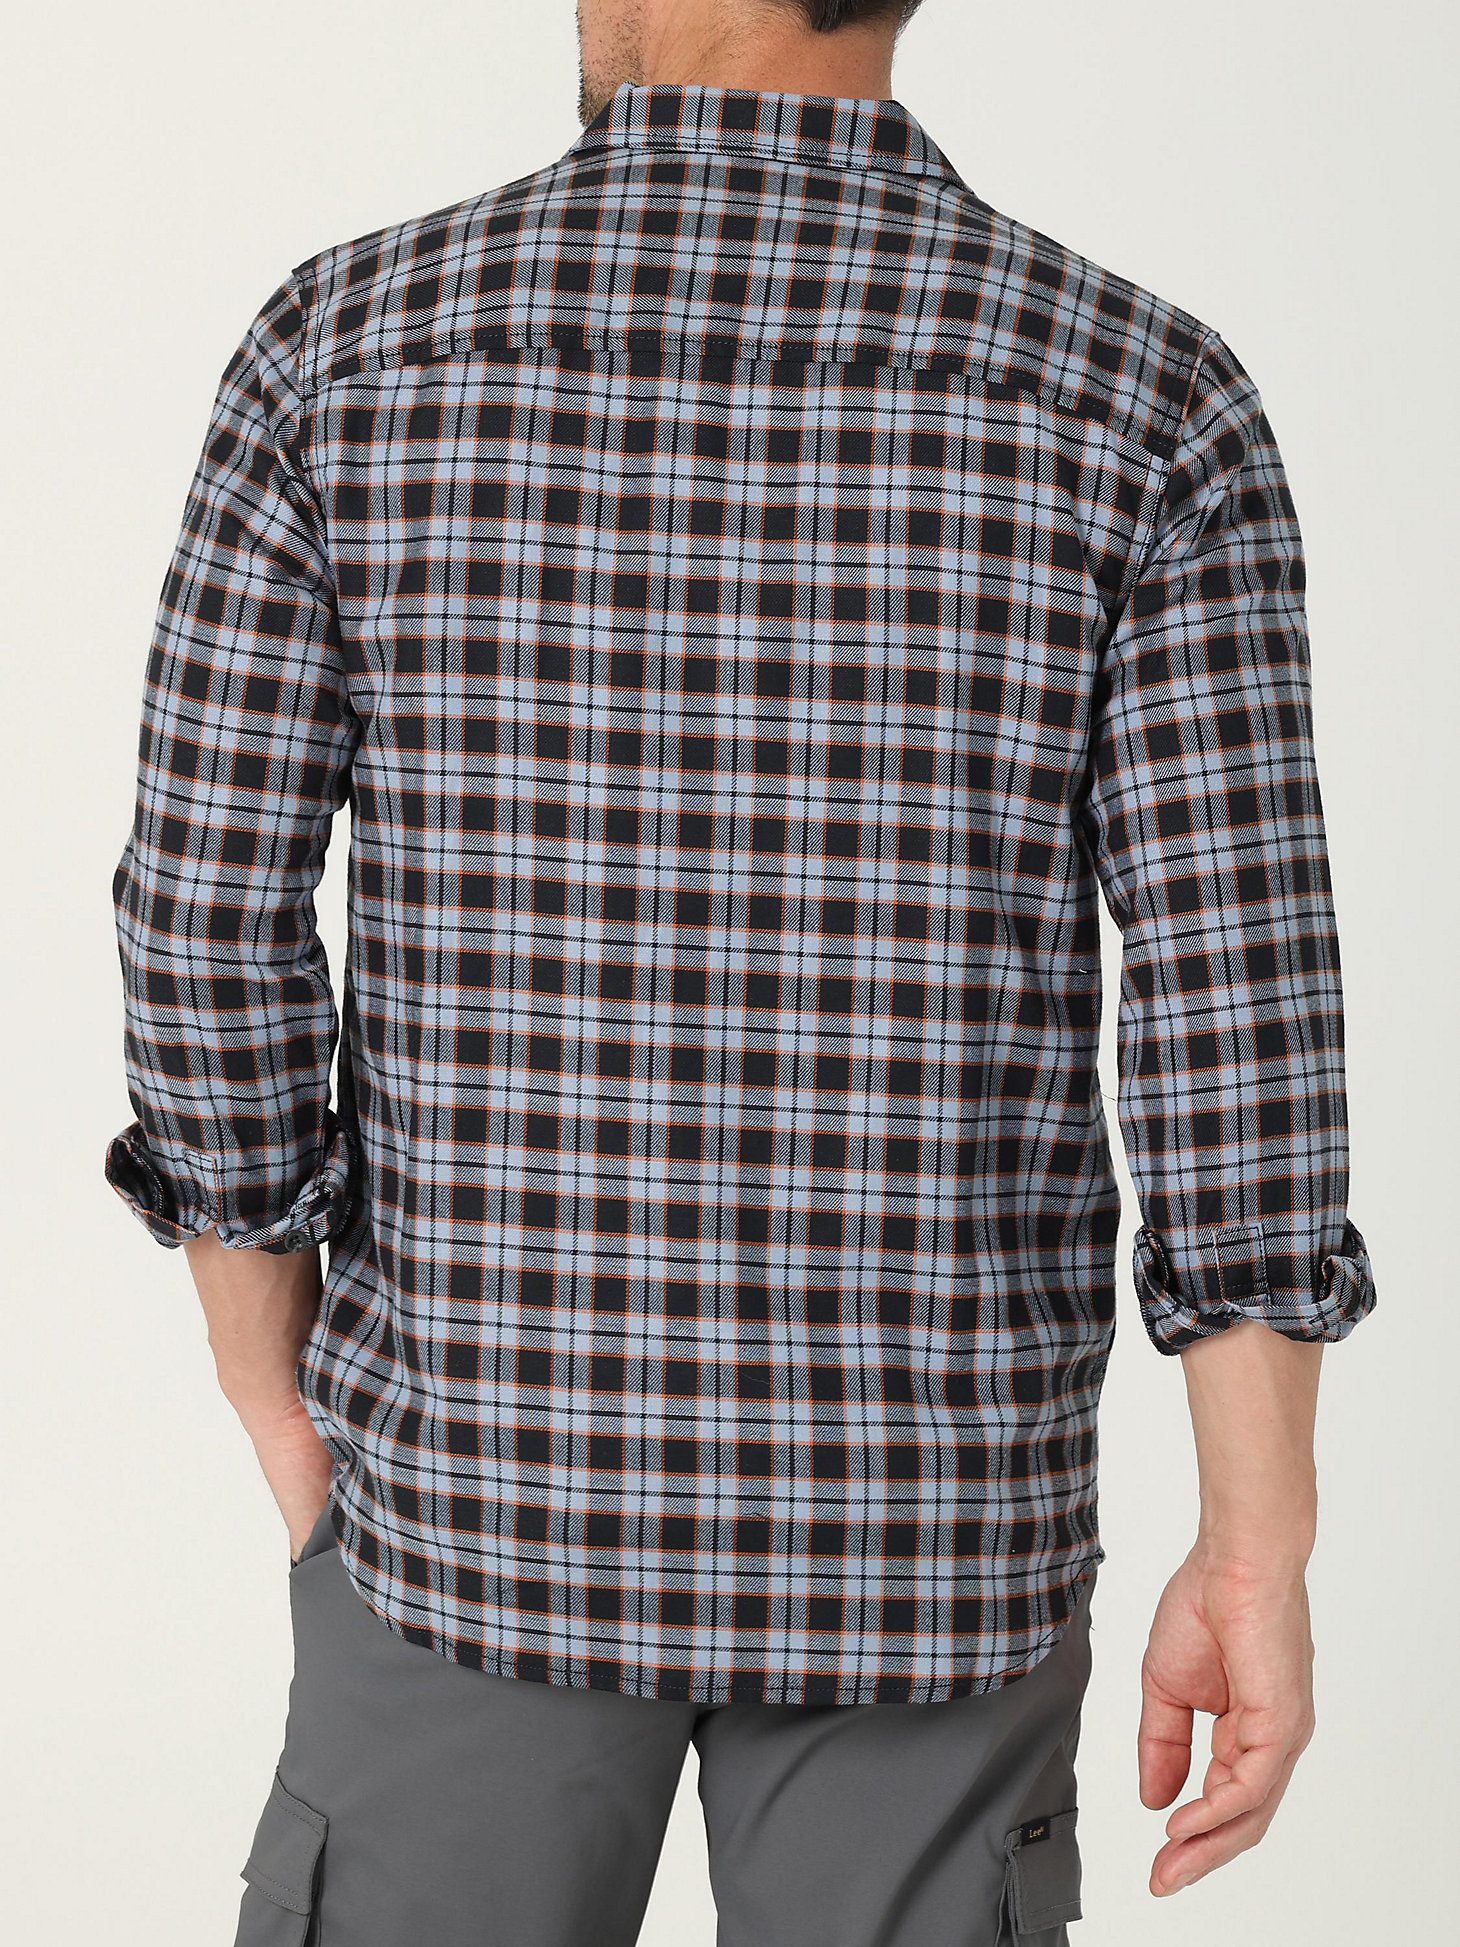 Men's Extreme Motion MVP Classic Stretch Plaid Button Down Shirt in Dreamy Black and Blue Plaid alternative view 1